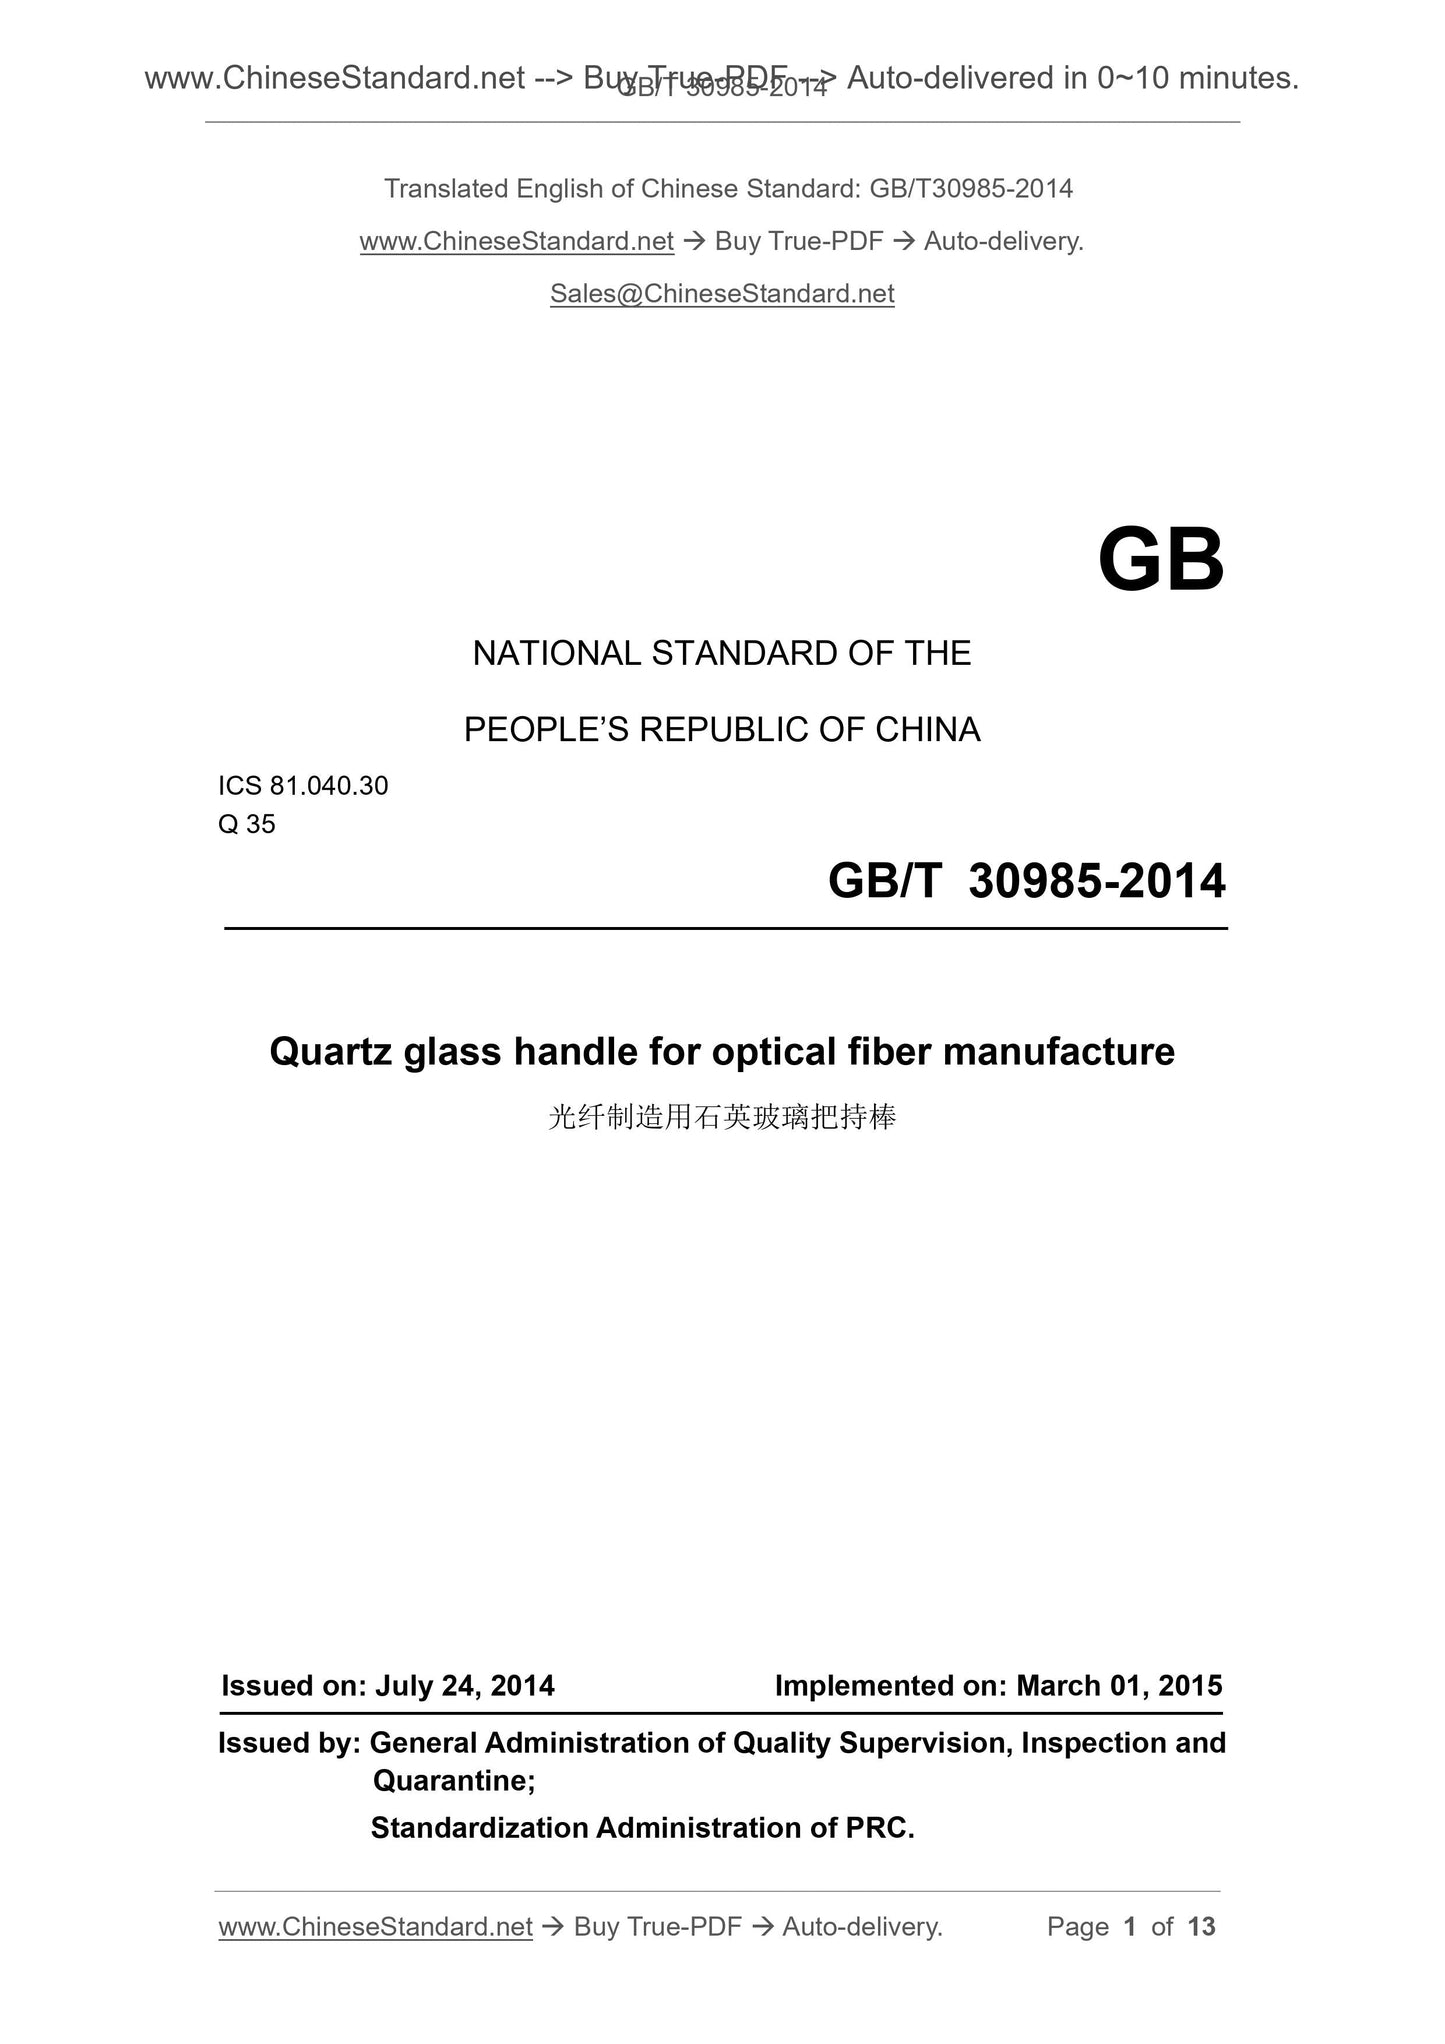 GB/T 30985-2014 Page 1